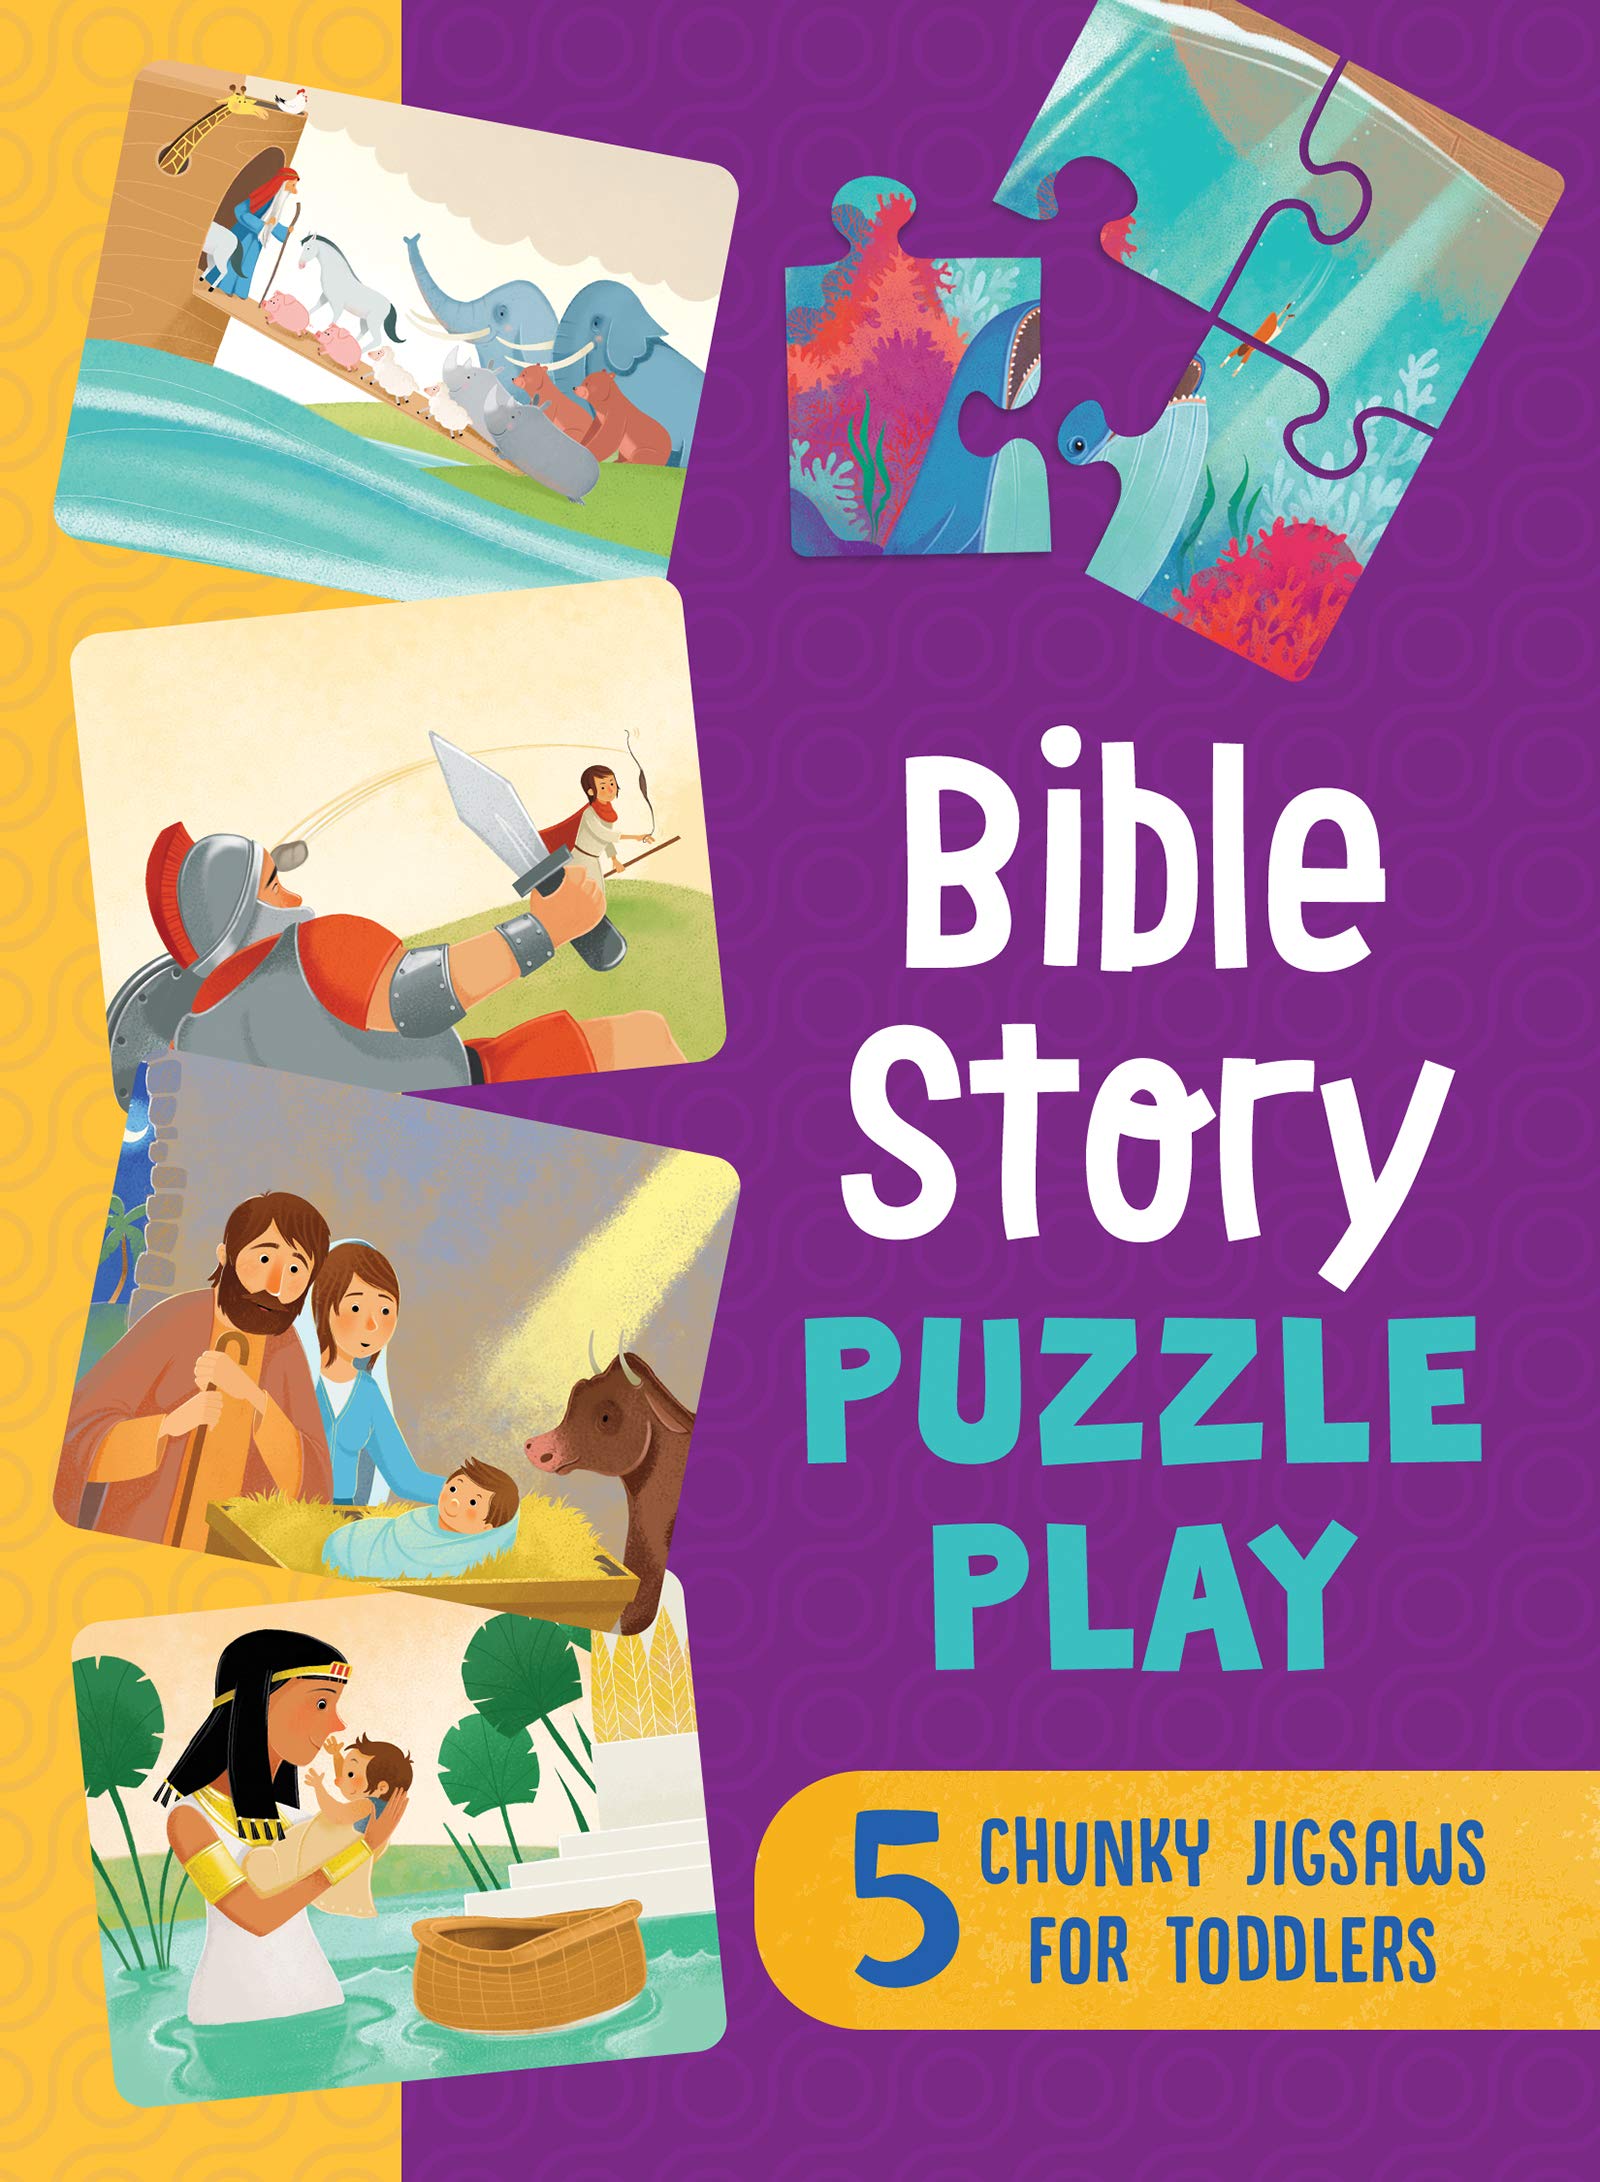 ROCKONLINE | Bible Story Puzzle Play: Chunky Jigsaws for Toddlers | New Creation Church | NCC | Joseph Prince | ROCK Bookshop | ROCK Bookstore | Star Vista | Children |  | Bible Stories | Puzzles | Adventure |  Bible Activities | Free delivery for Singapore Orders above $50.